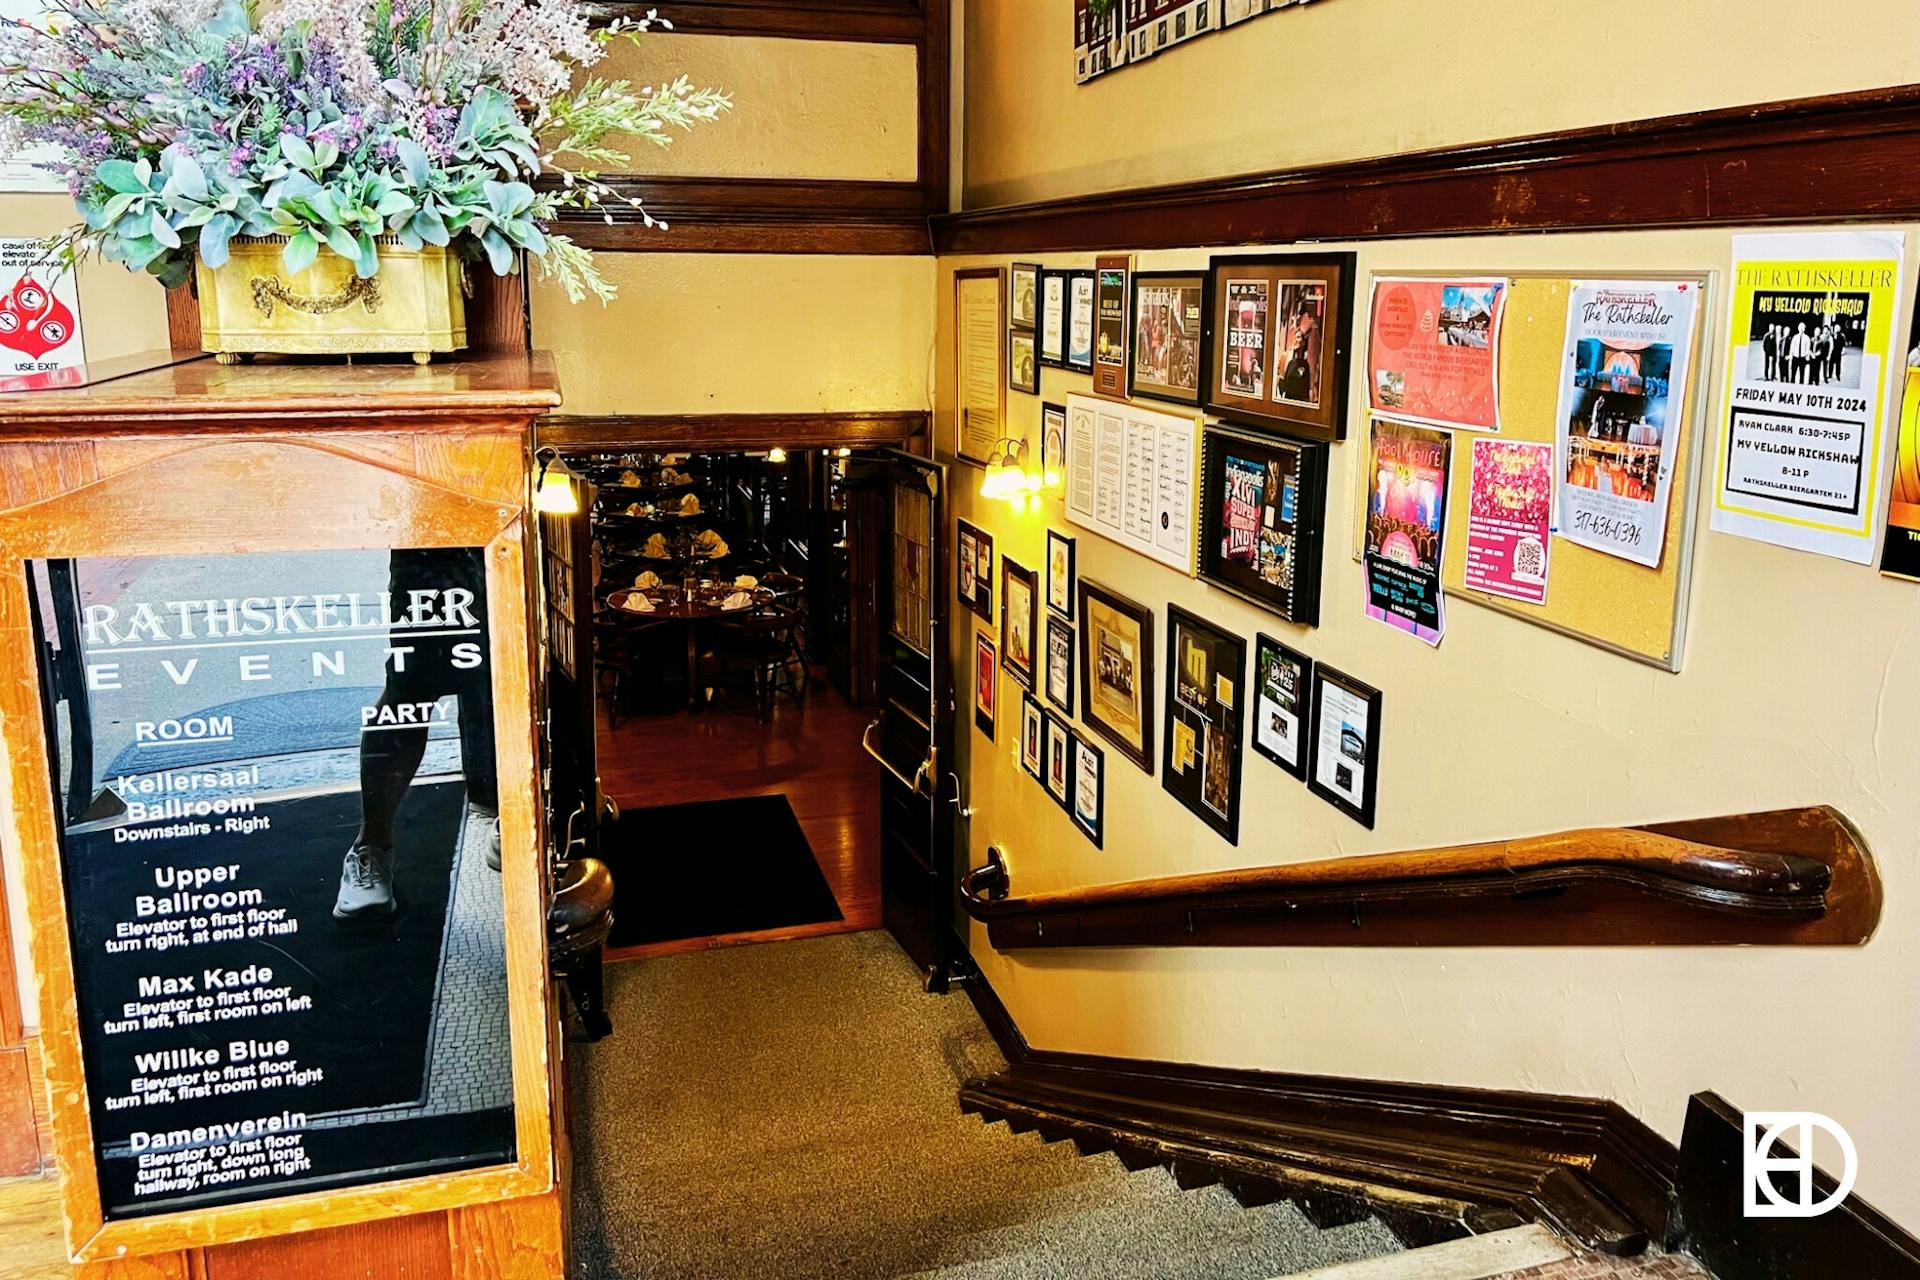 Interior photo of the stairs leading to The Rathskeller